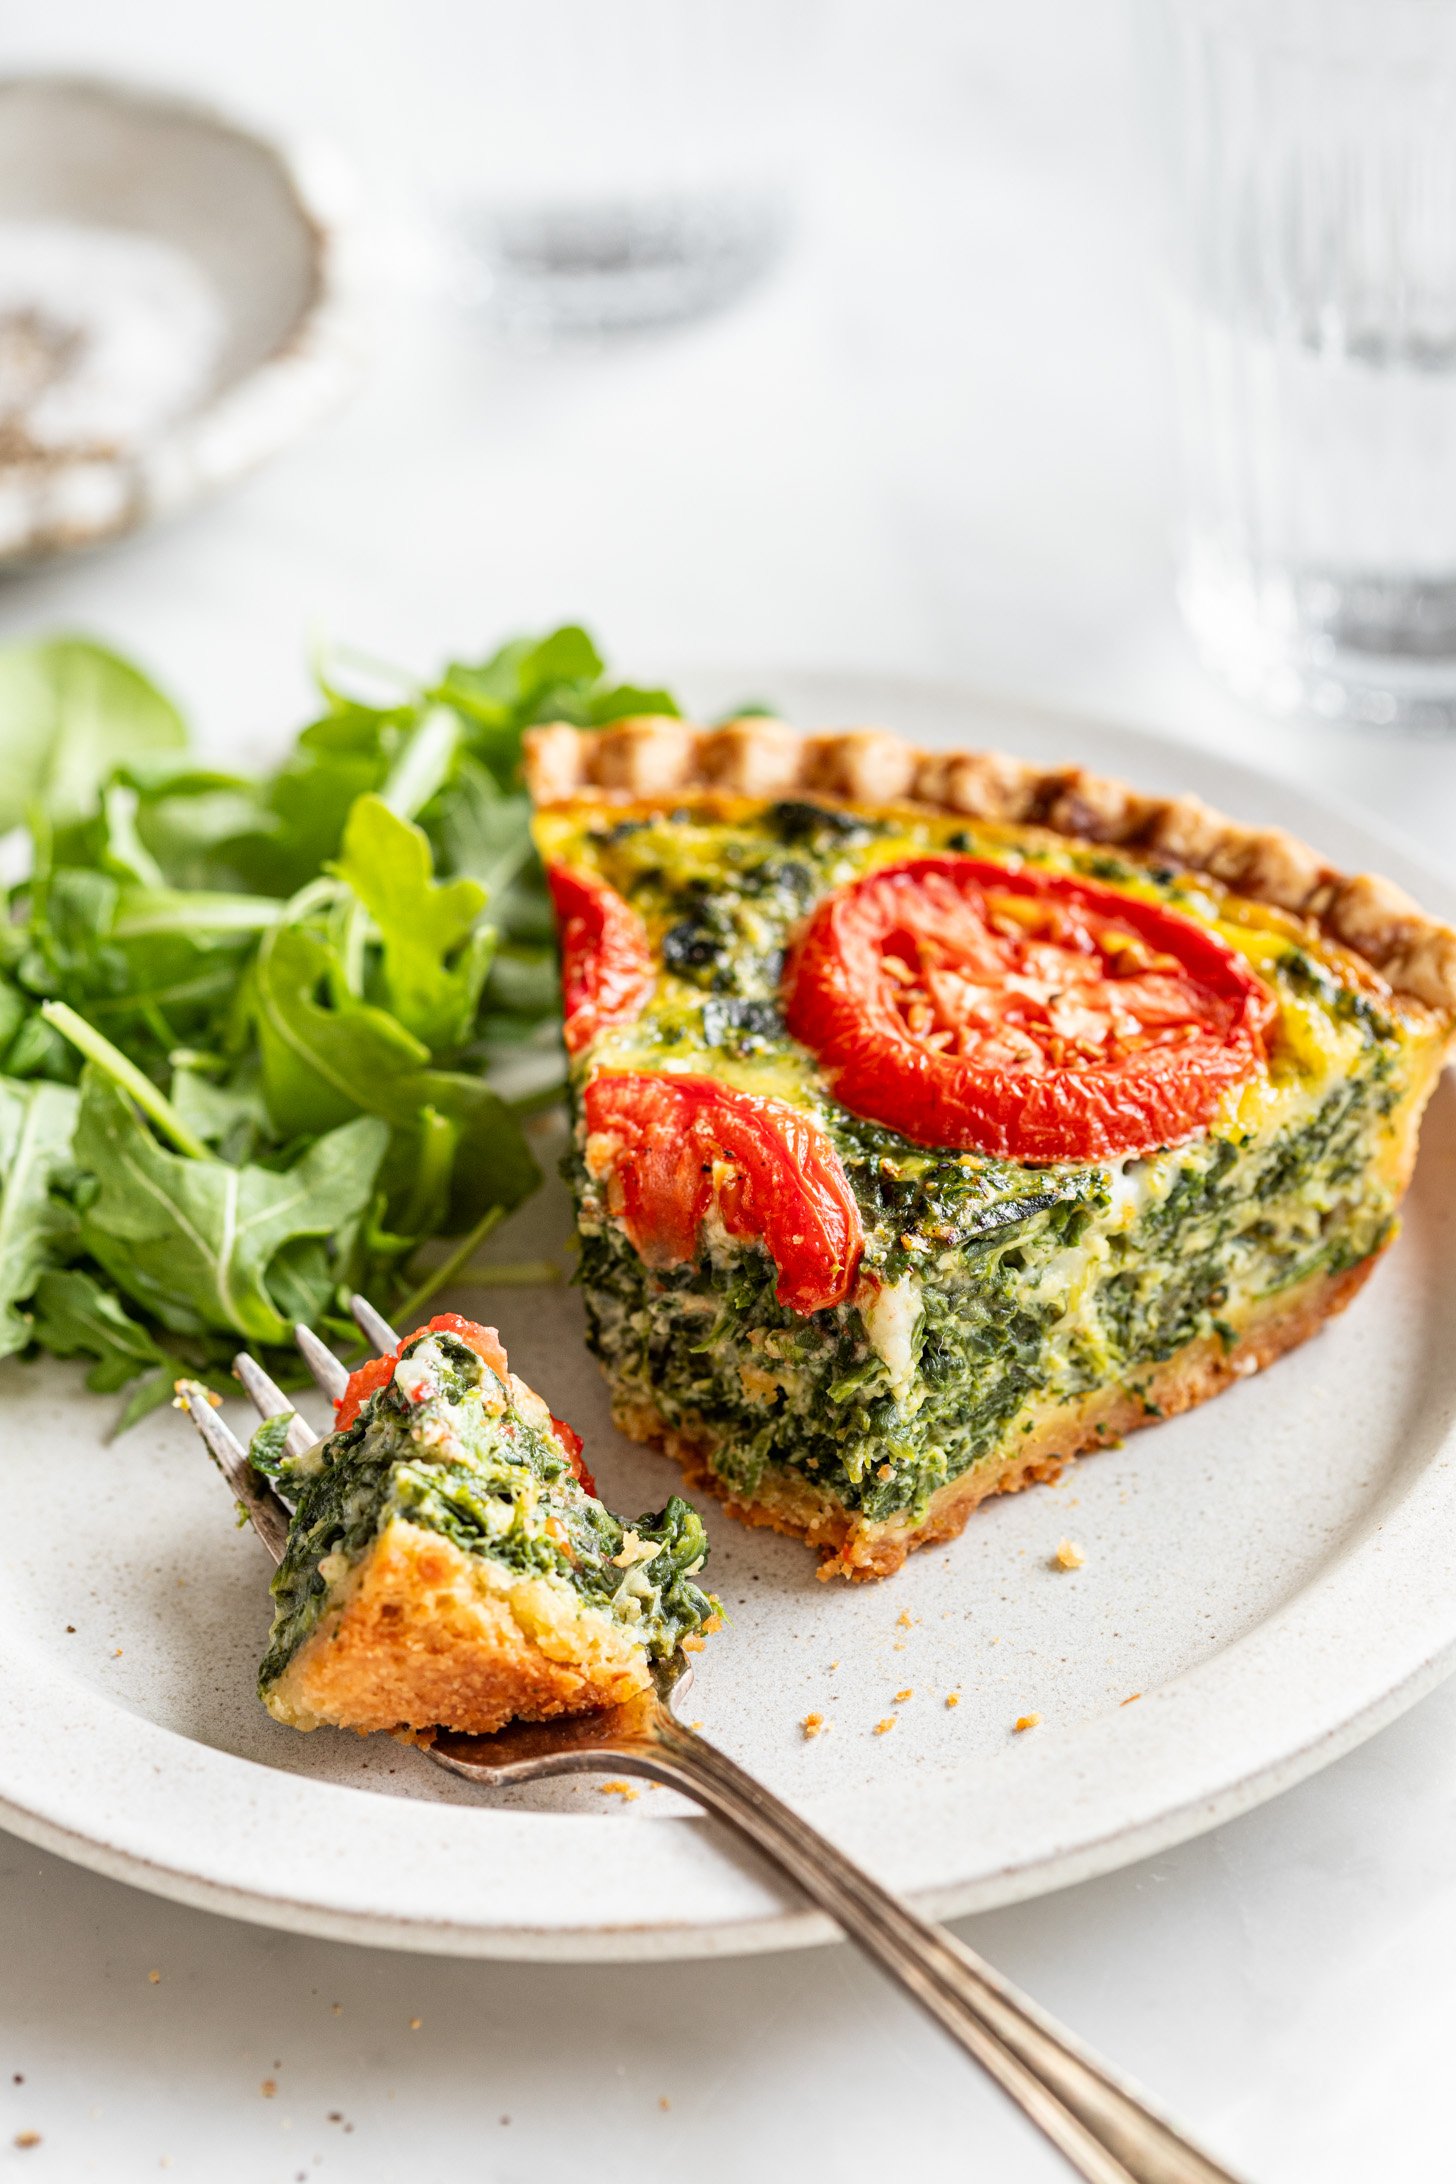 A slice of quiche sitting next to arugula leaves on a white plate. There is a fork holding a piece of quiche also on the plate. Quiche has tomato slices and spinach visible on top. The quiche is sitting on a white marble surface and is surrounded by a few pieces of dishware out of focus in the background. A few crumbs are on the table.